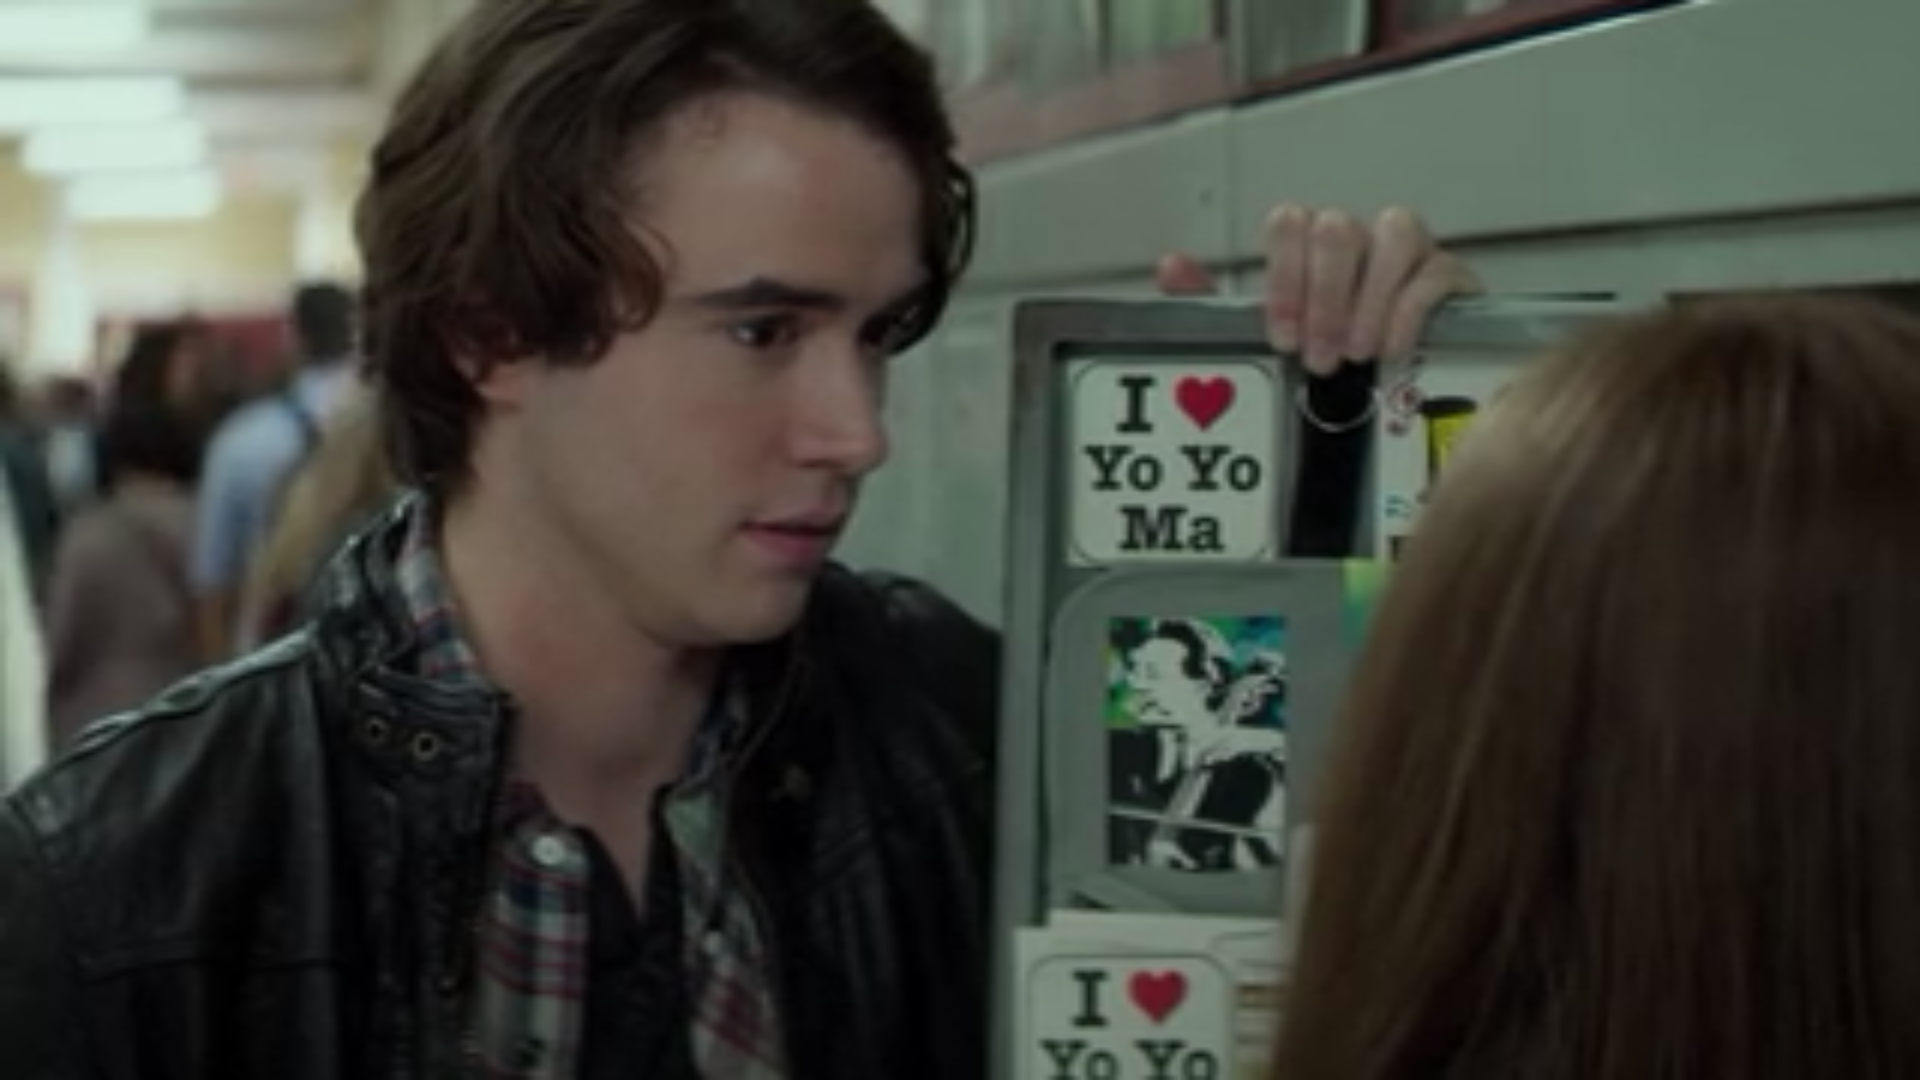 A teen boy stands by a girl's open locker, which is decorated with multiple stickers that read "I Heart Yo Yo Ma."